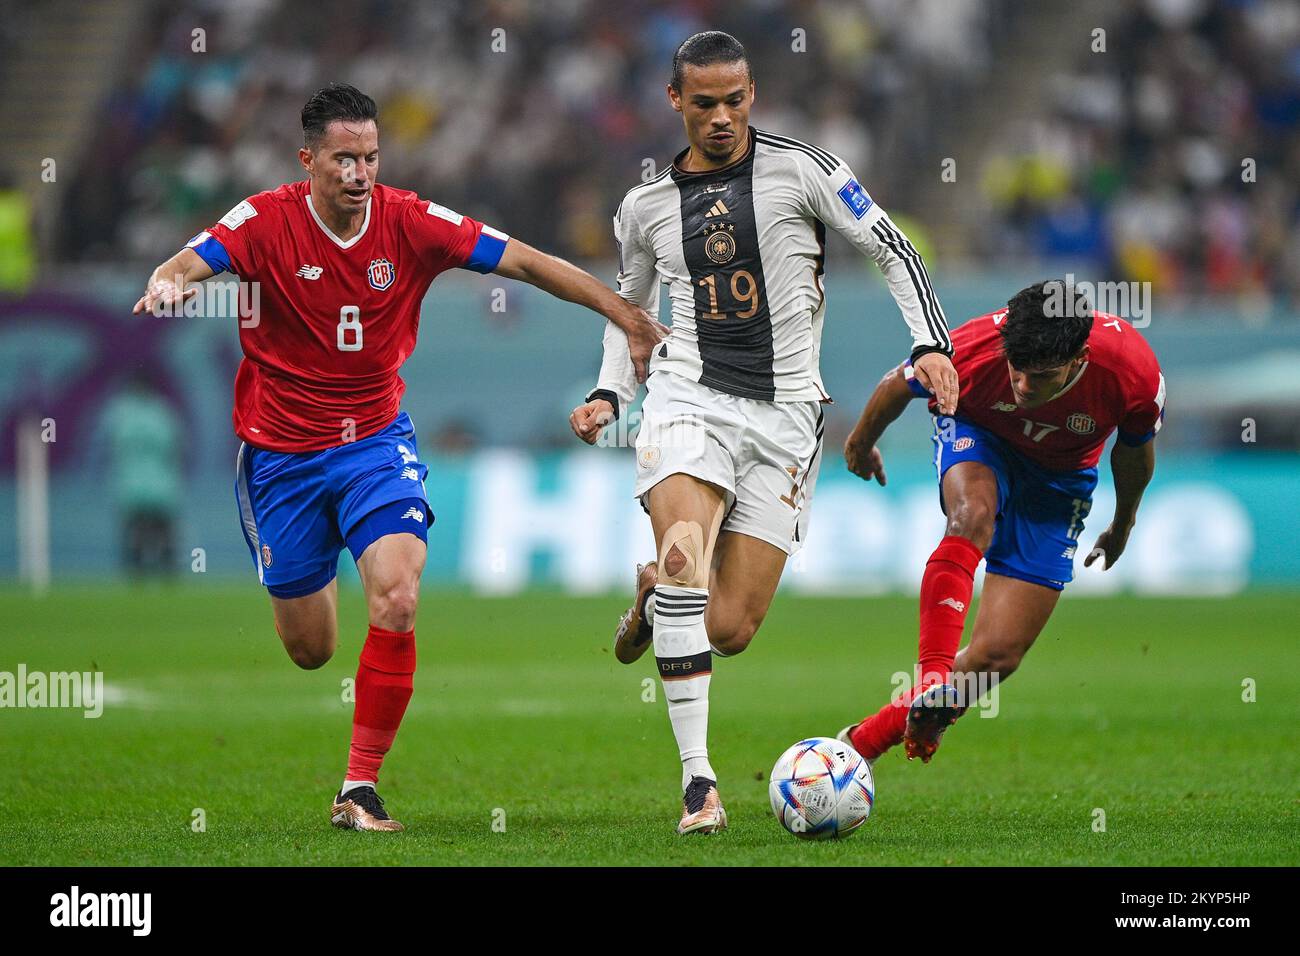 AL KHOR, QATAR - DECEMBER 1: Leroy Sane of Germany battles for the ball with Bryan Oviedo of Costa Rica and Yeltsin Tejeda of Costa Rica during the Group E - FIFA World Cup Qatar 2022 match between Costa Rica and Germany at the Al Bayt Stadium on December 1, 2022 in Al Khor, Qatar (Photo by Pablo Morano/BSR Agency) Stock Photo